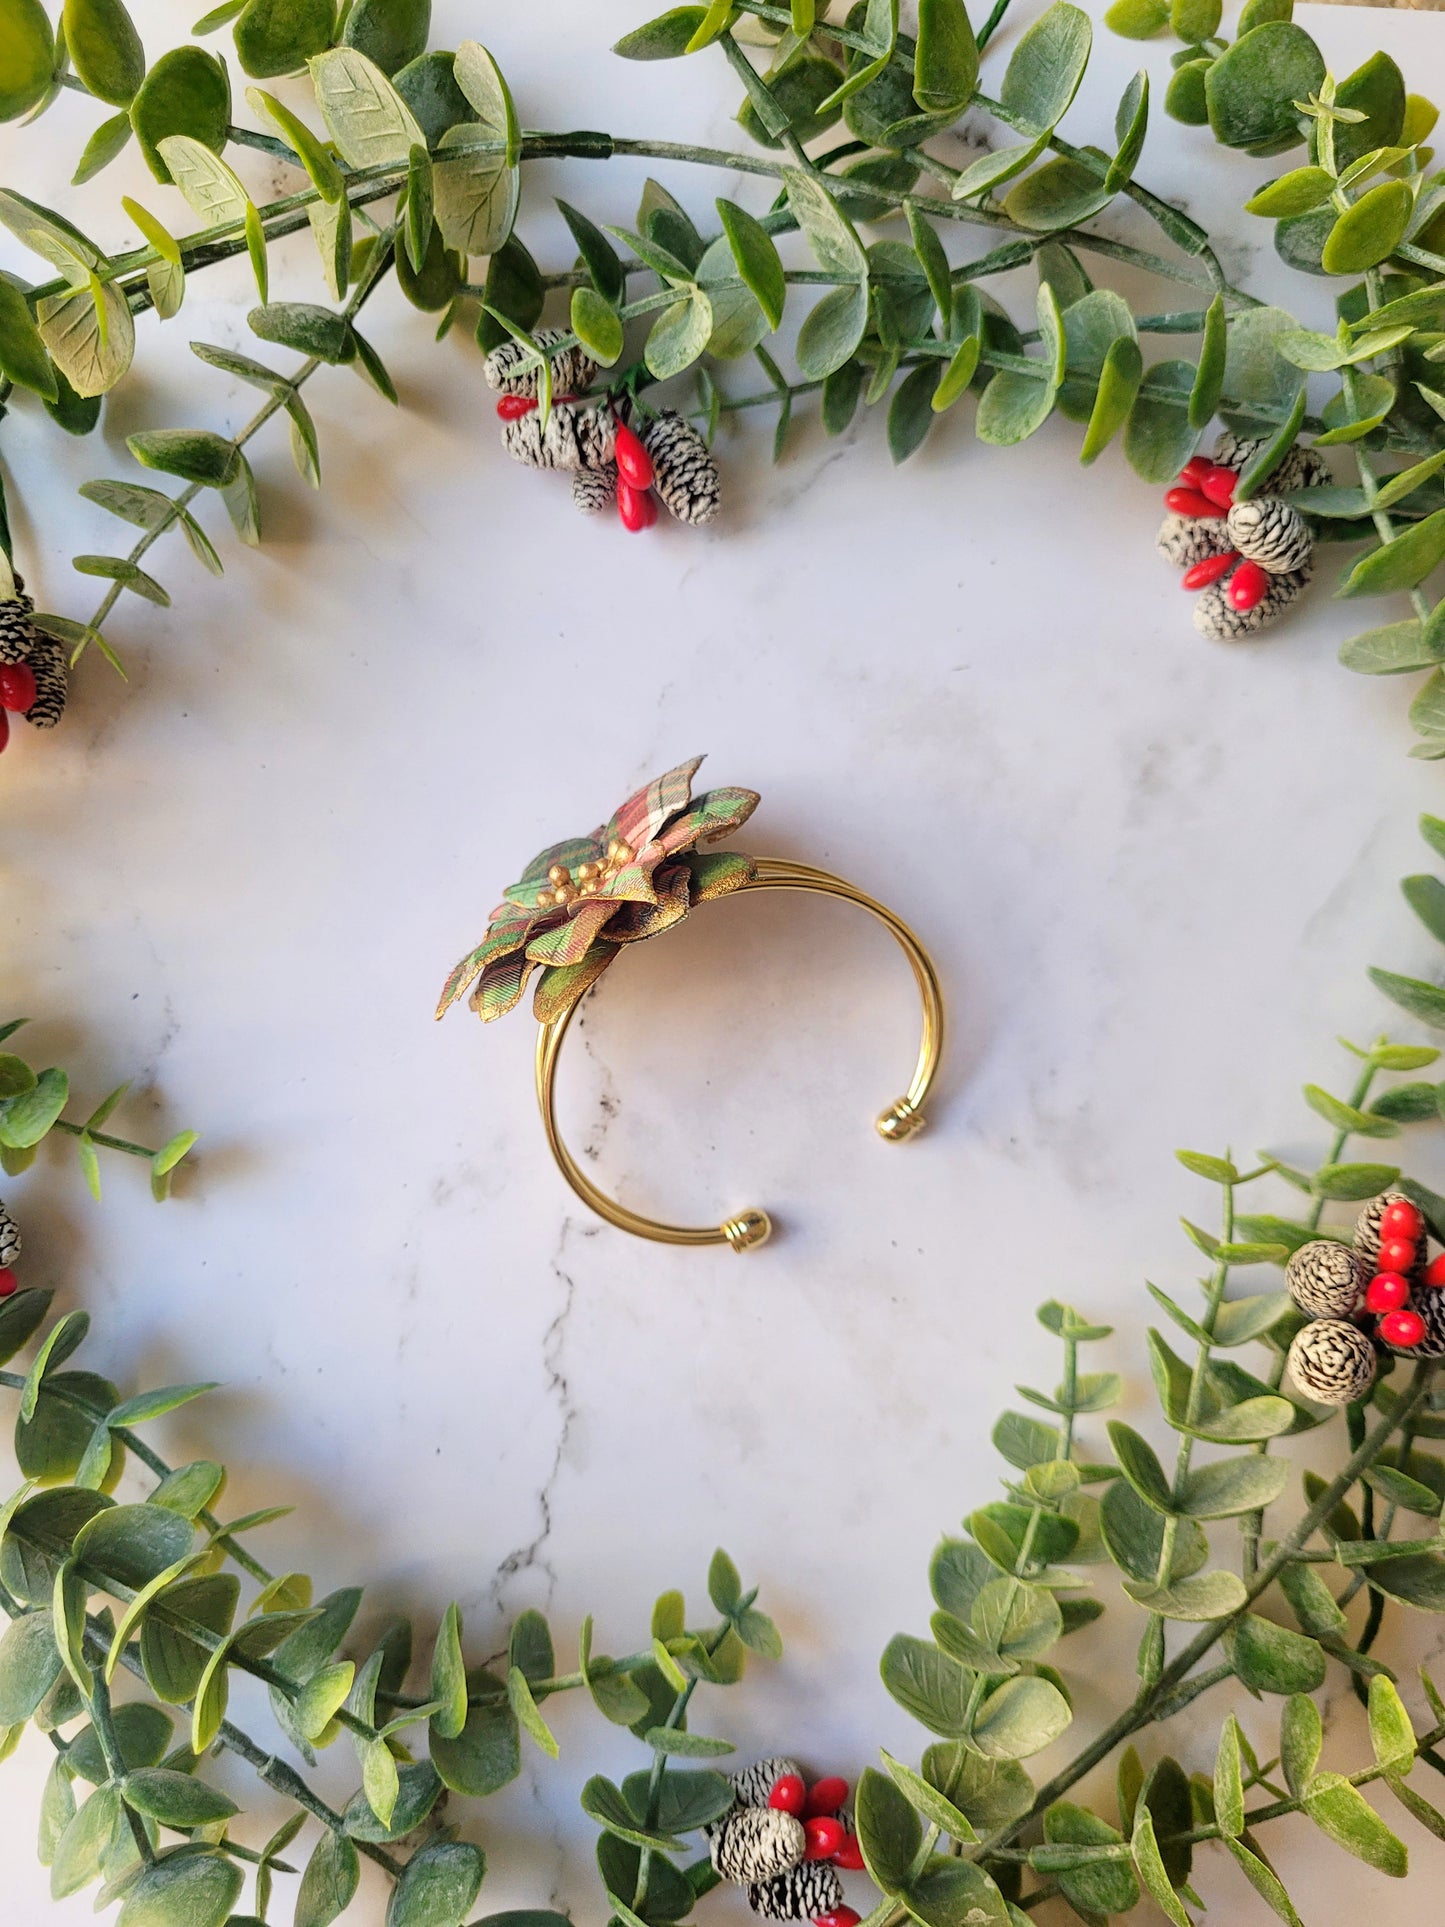 side view of the Christmas themed plaid poinsettia bracelet on a marble background surrounded by foliage.